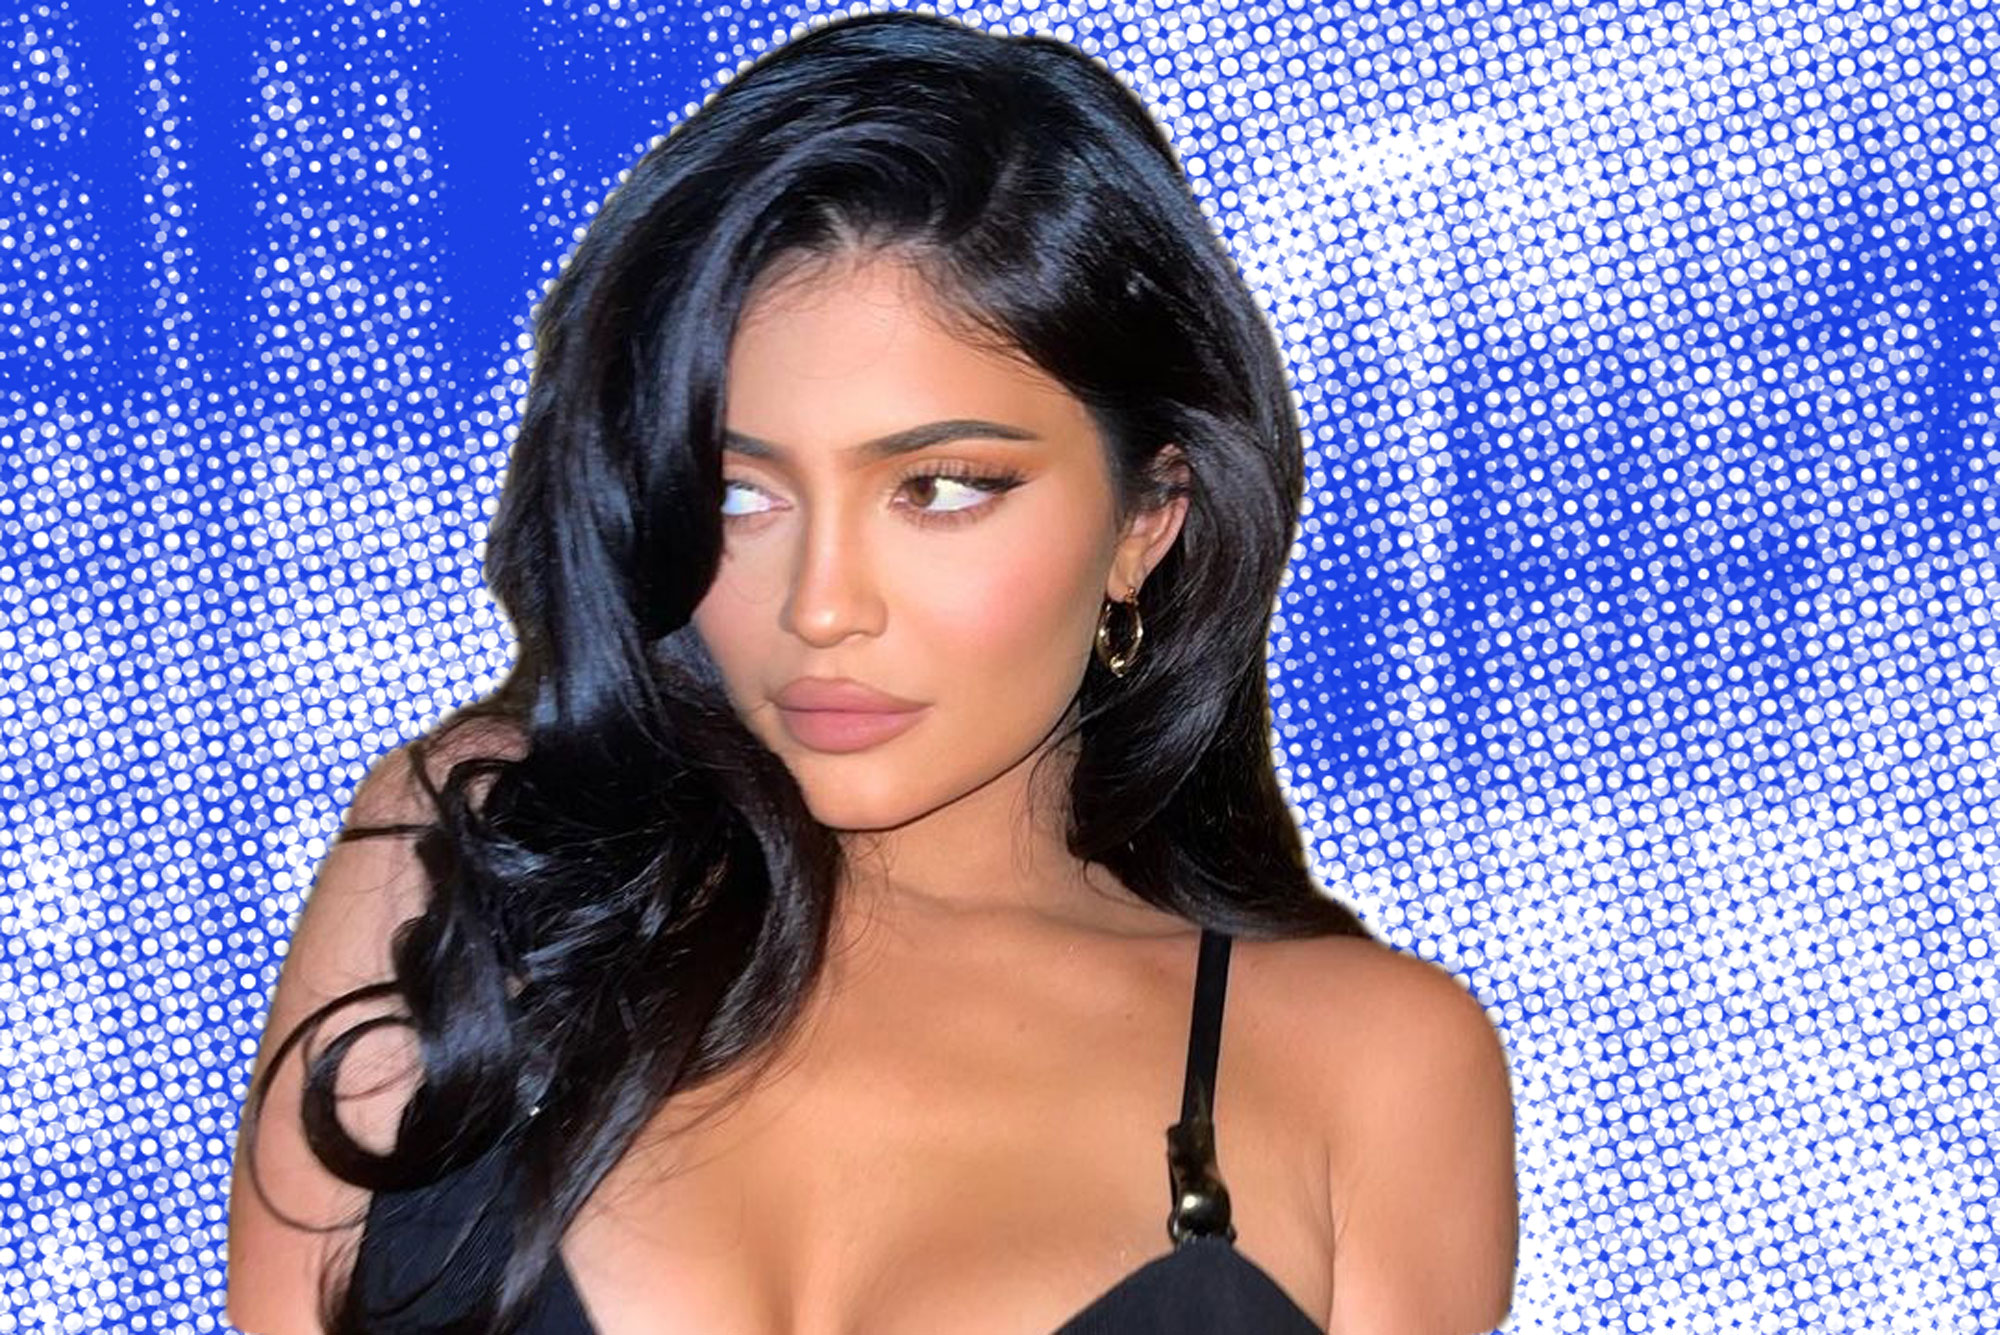 Why fans think Kylie Jenner is pregnant with a boy